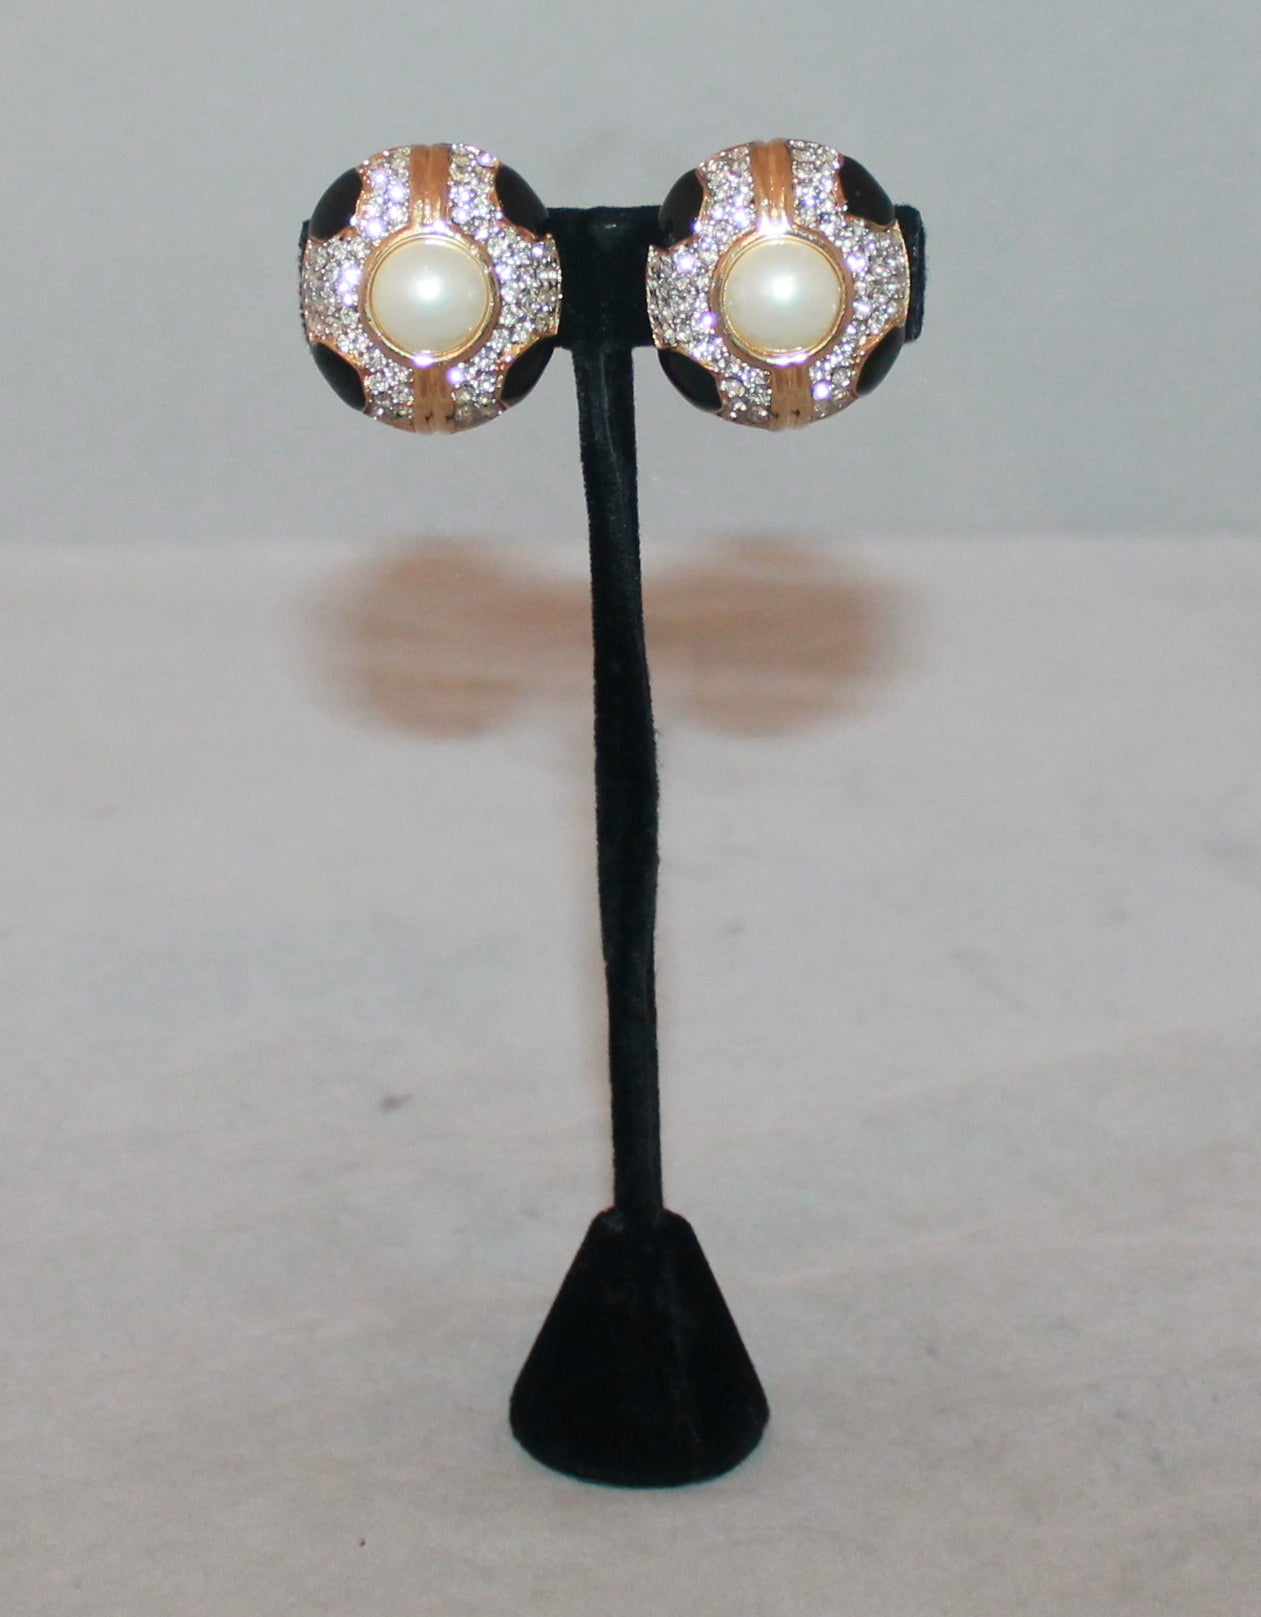 Ciner 1990's Vintage Black Enamel Pearl Clip-ons with Rhinestones. These earrings are in excellent condition and are gold-tone. 

Length- 1.25